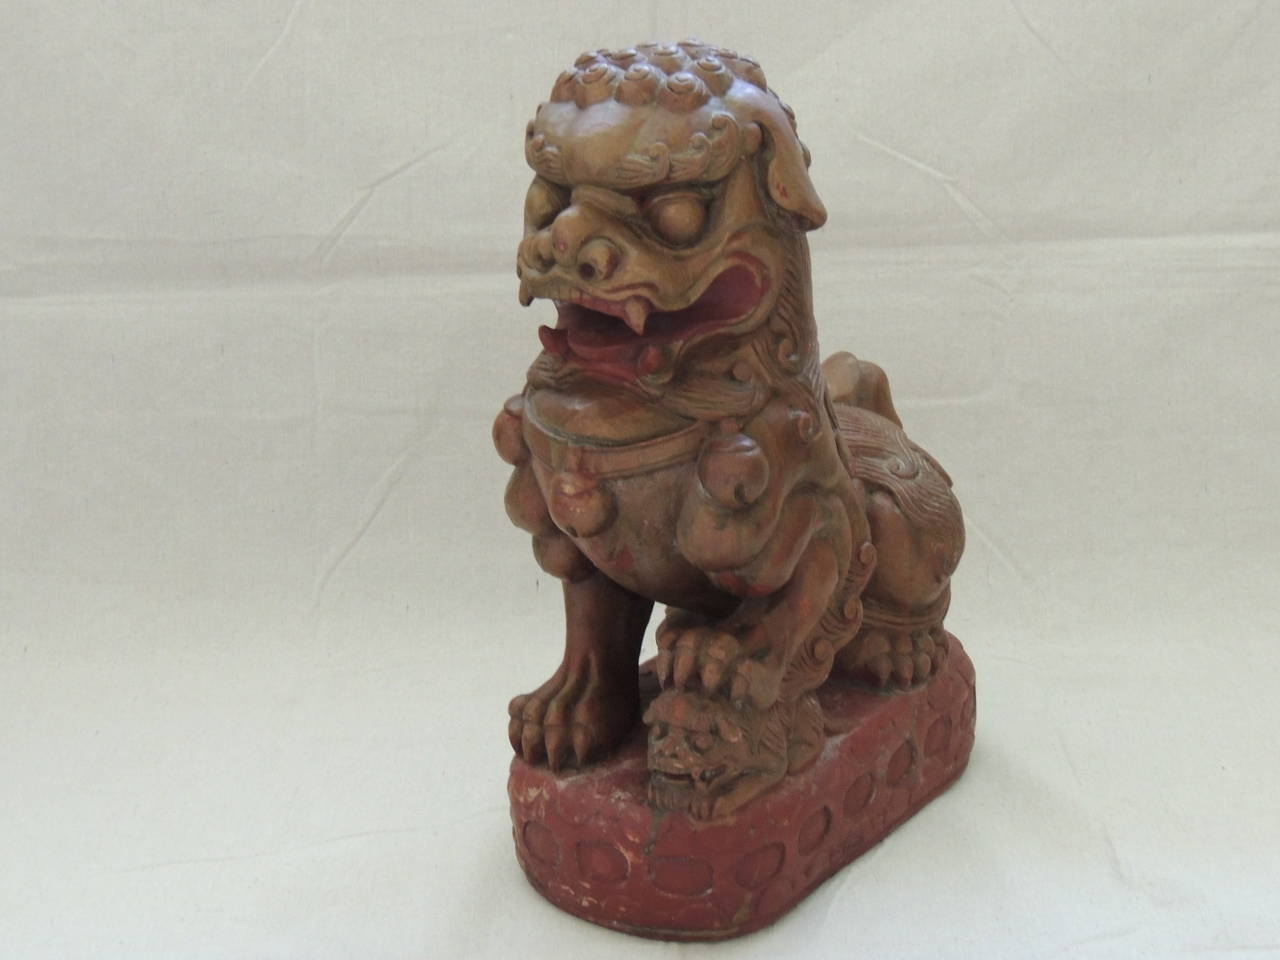 Wood carved foo dog holding cub, solid wood carving, reddish paint and traces of gold leaf all around (heavy).